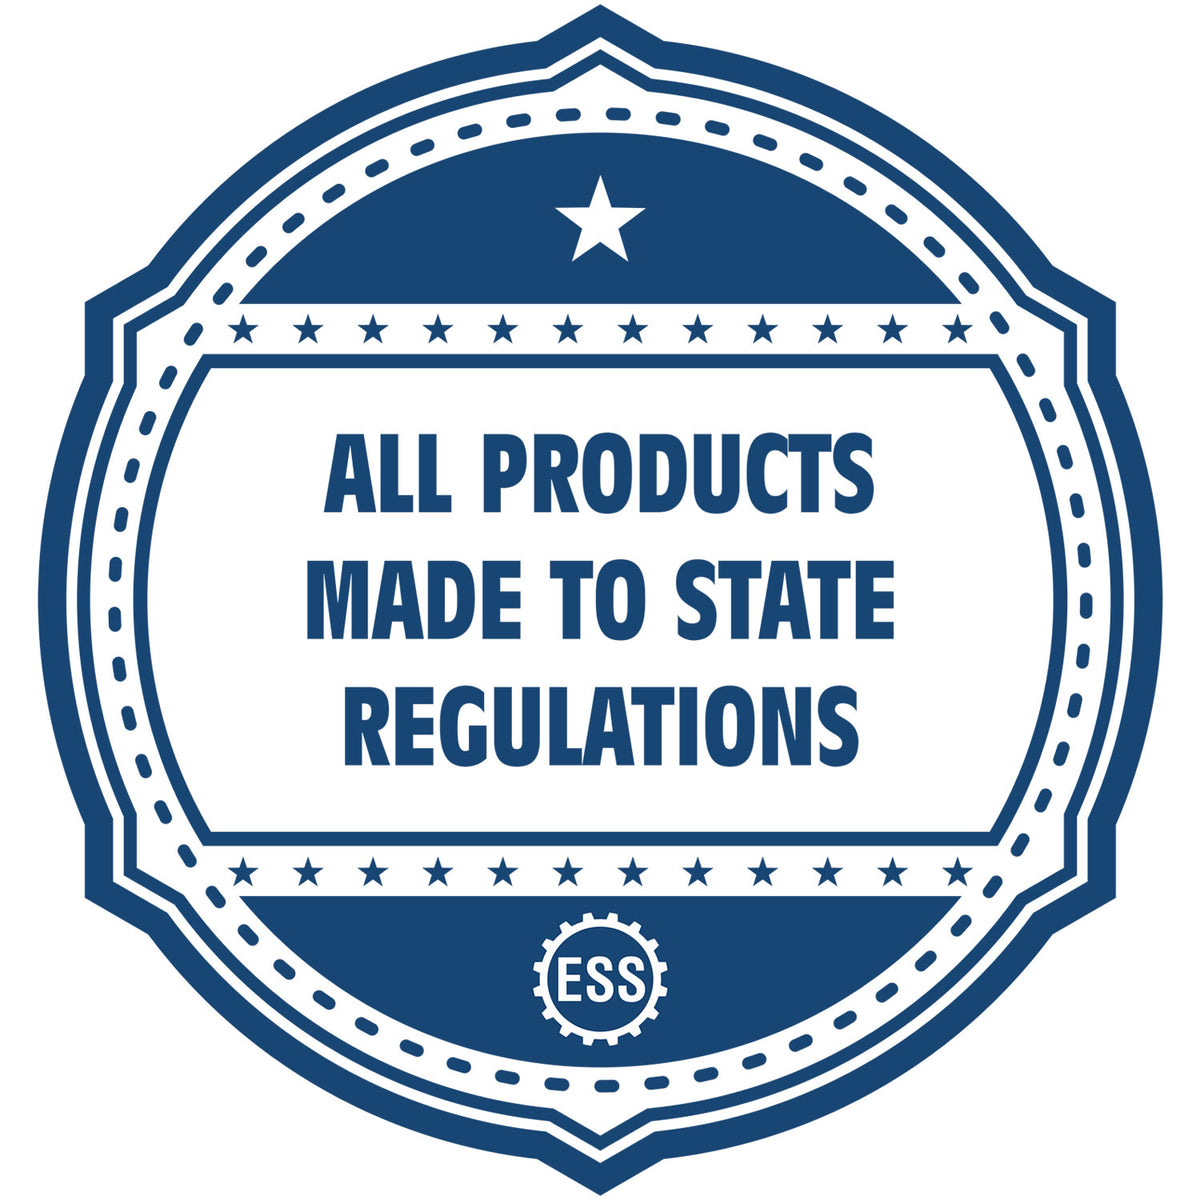 An icon or badge element for the Digital Indiana PE Stamp and Electronic Seal for Indiana Engineer showing that this product is made in compliance with state regulations.